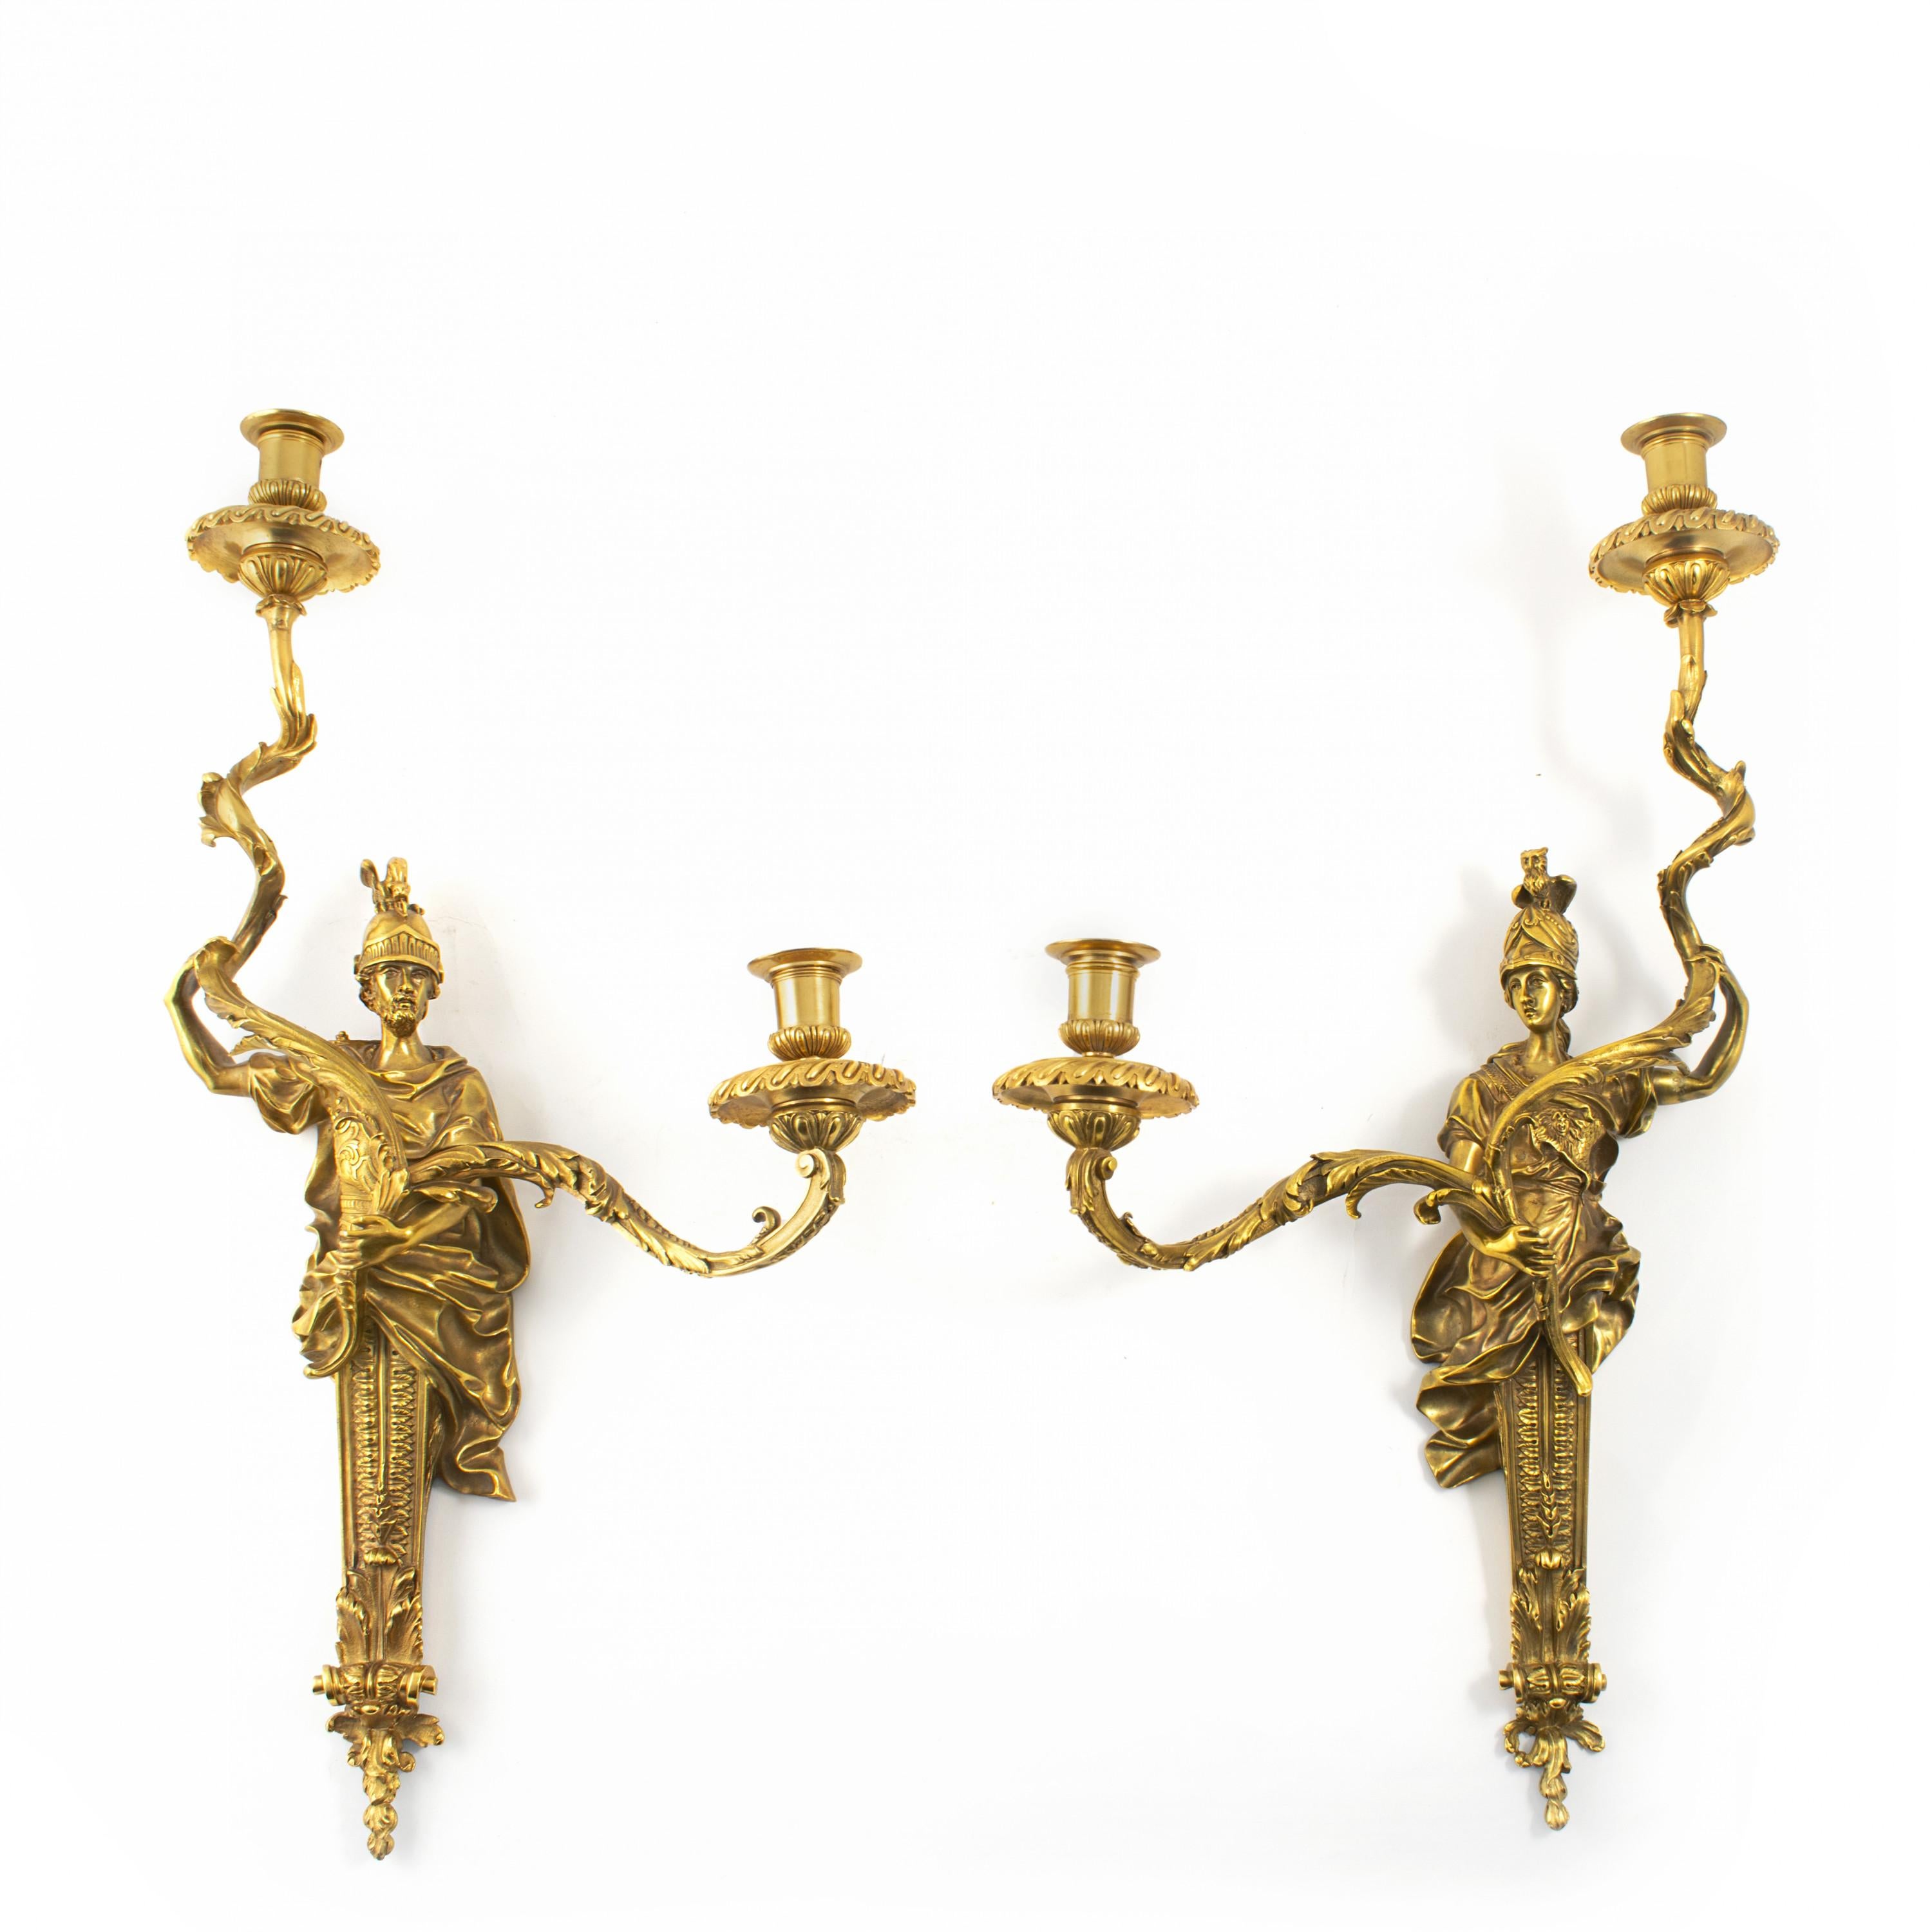 A refined set of four French Louis XVI style gilt bronze wall lamps.
Made in France in the late 19th century by Henri Vian.
Very high quality.

Each fitted with two lights held by a bronze sculpture.

Measure: Height: 61 cm.
Sold as a set of four.